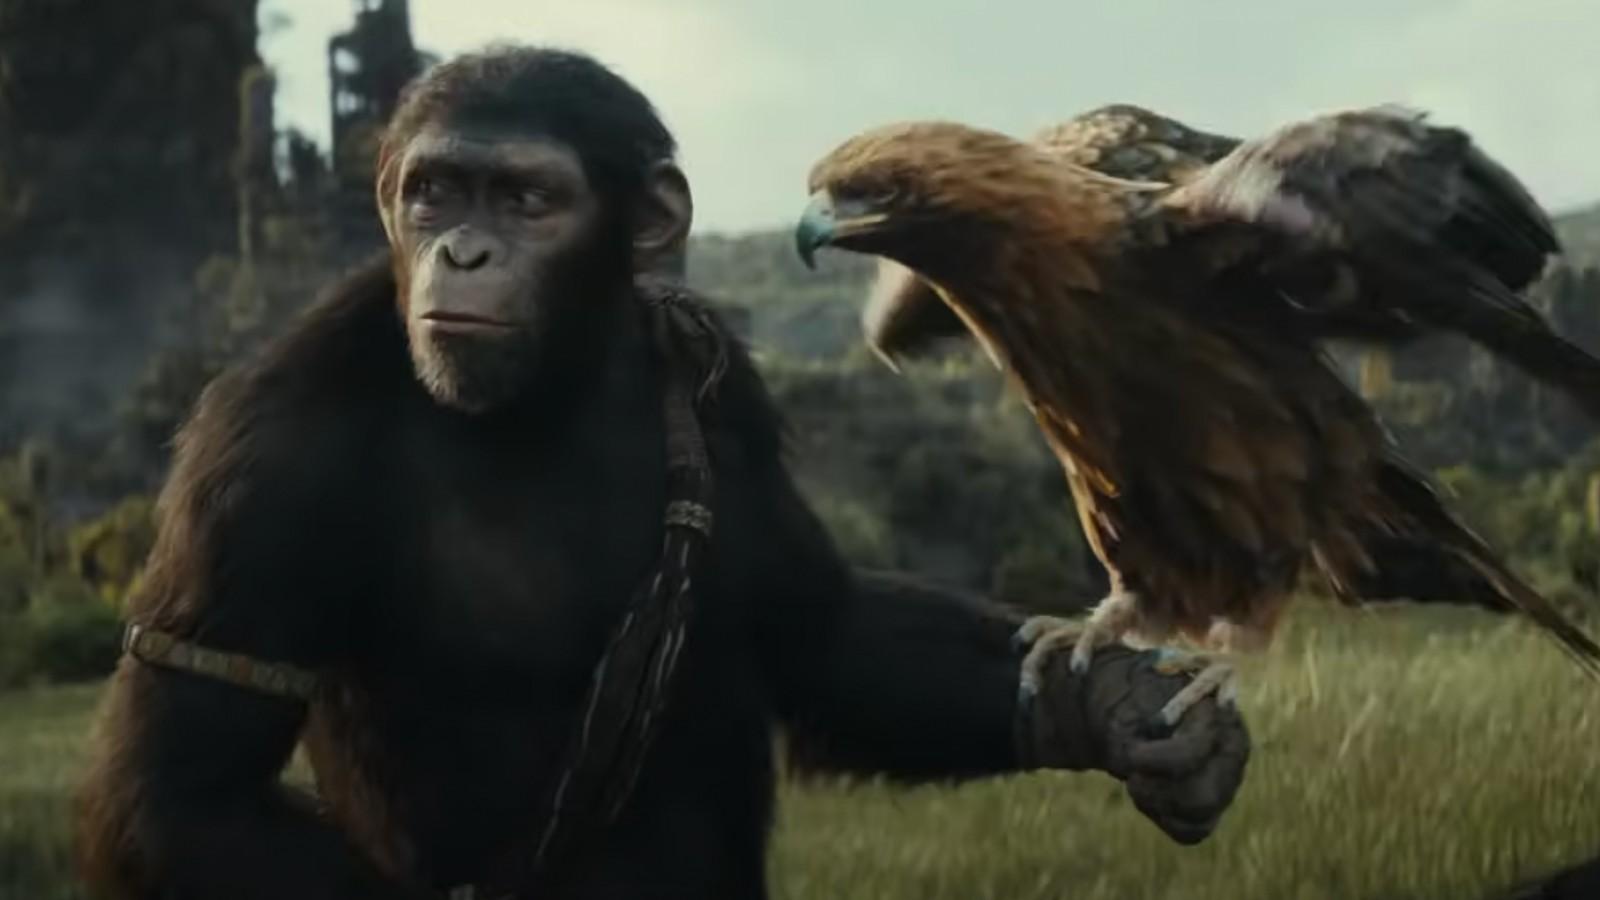 Kingdom of the of the Apes trailer introduces earth where apes